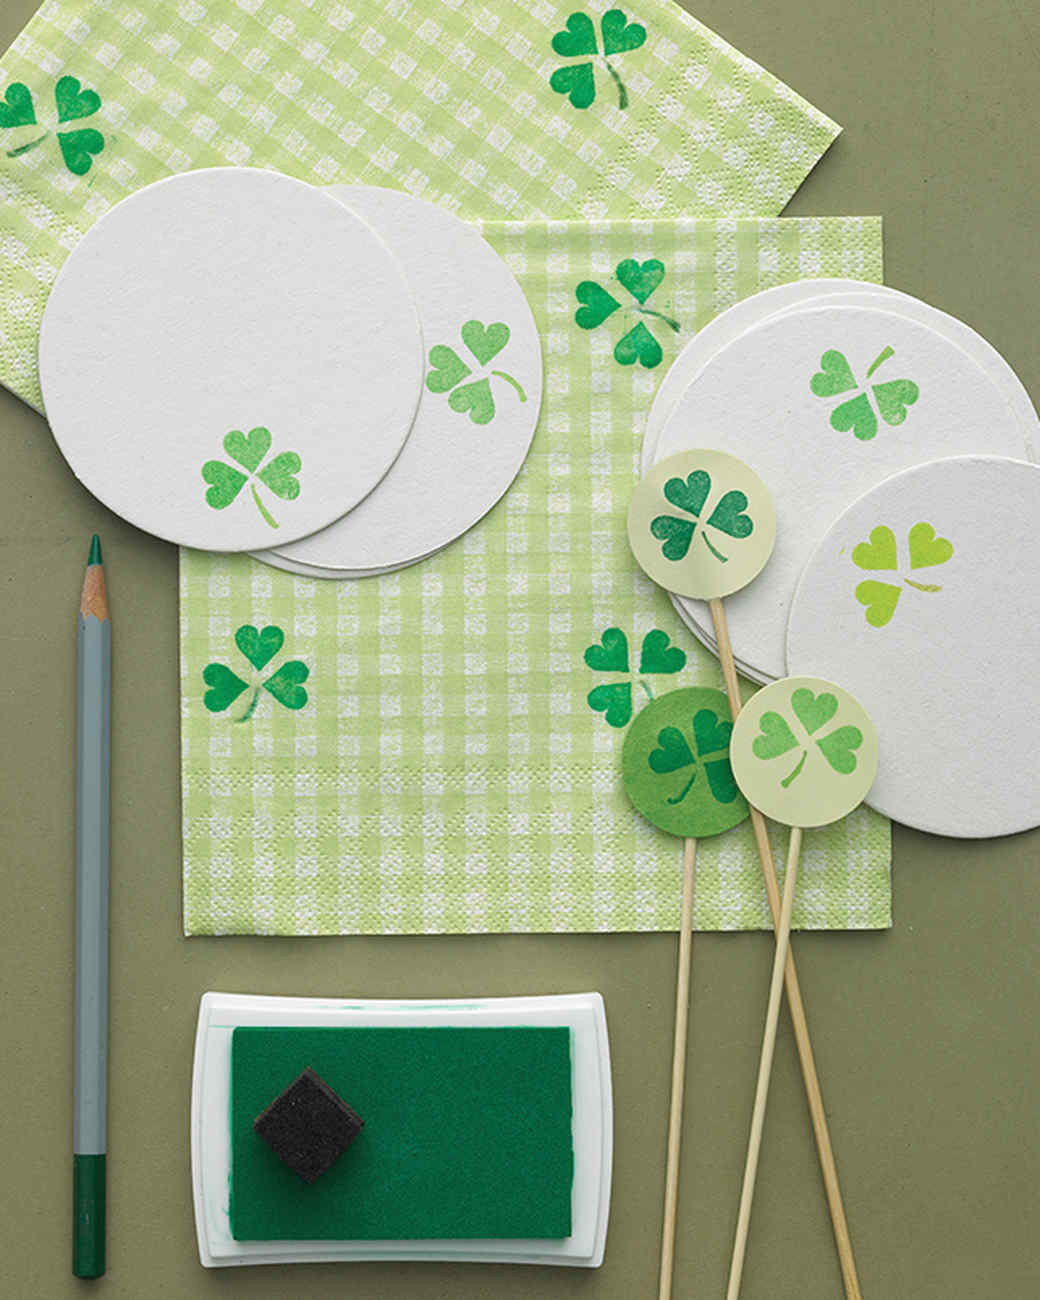 Saint Patrick's Day Crafts
 St Patrick s Day Crafts and Decorations